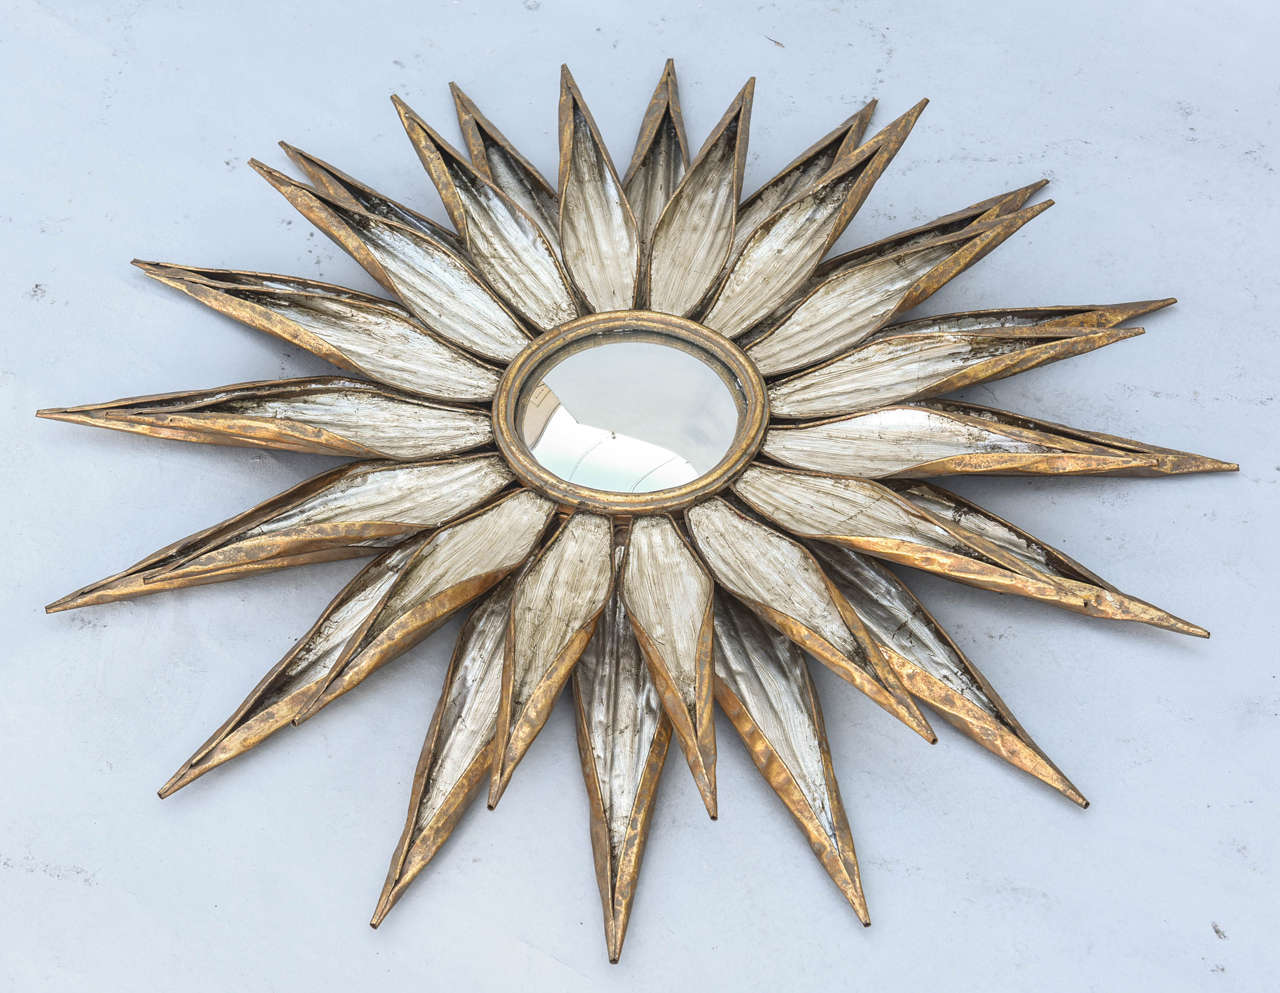 Pair of sunburst mirrors, of tole with silver and gold gilded finish, each centered with a convex mirror, having two-tiers of metal 